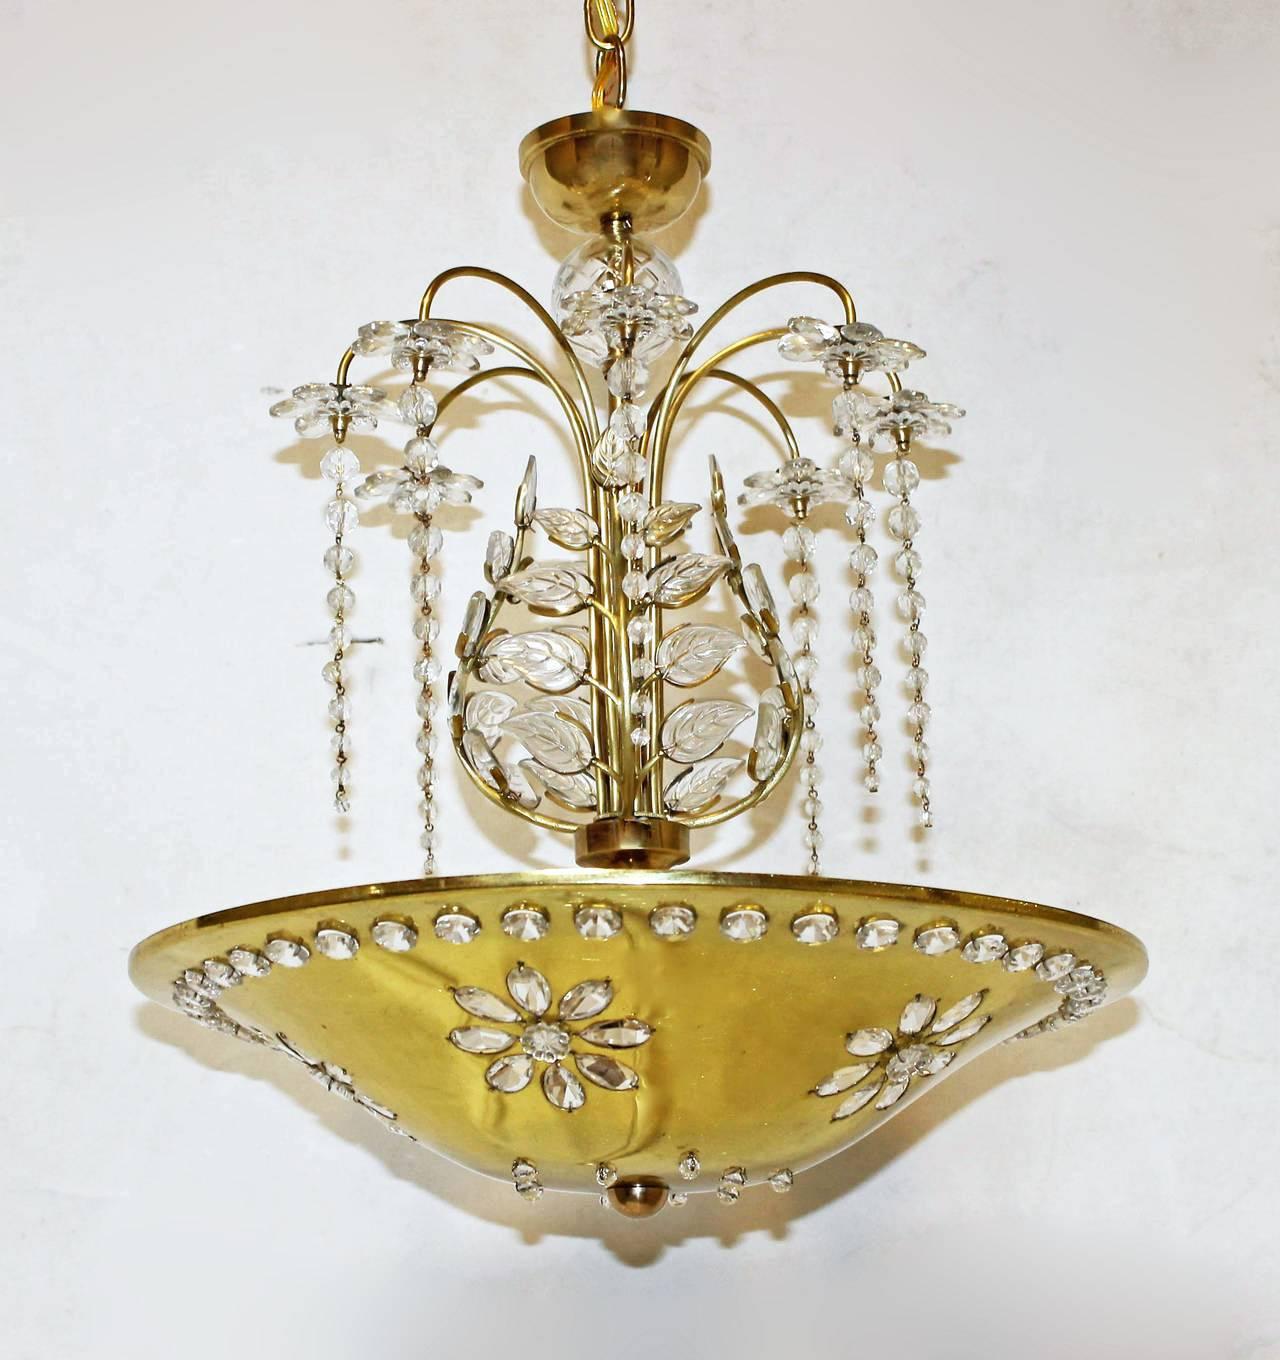 Beautiful dish form chandelier in the style of Maison Bagues. Polished brass dish is pierced with flower design and set with crystals that become illuminated with interior lighting. Center column is surrounded by crystal leaves and crystal flowers